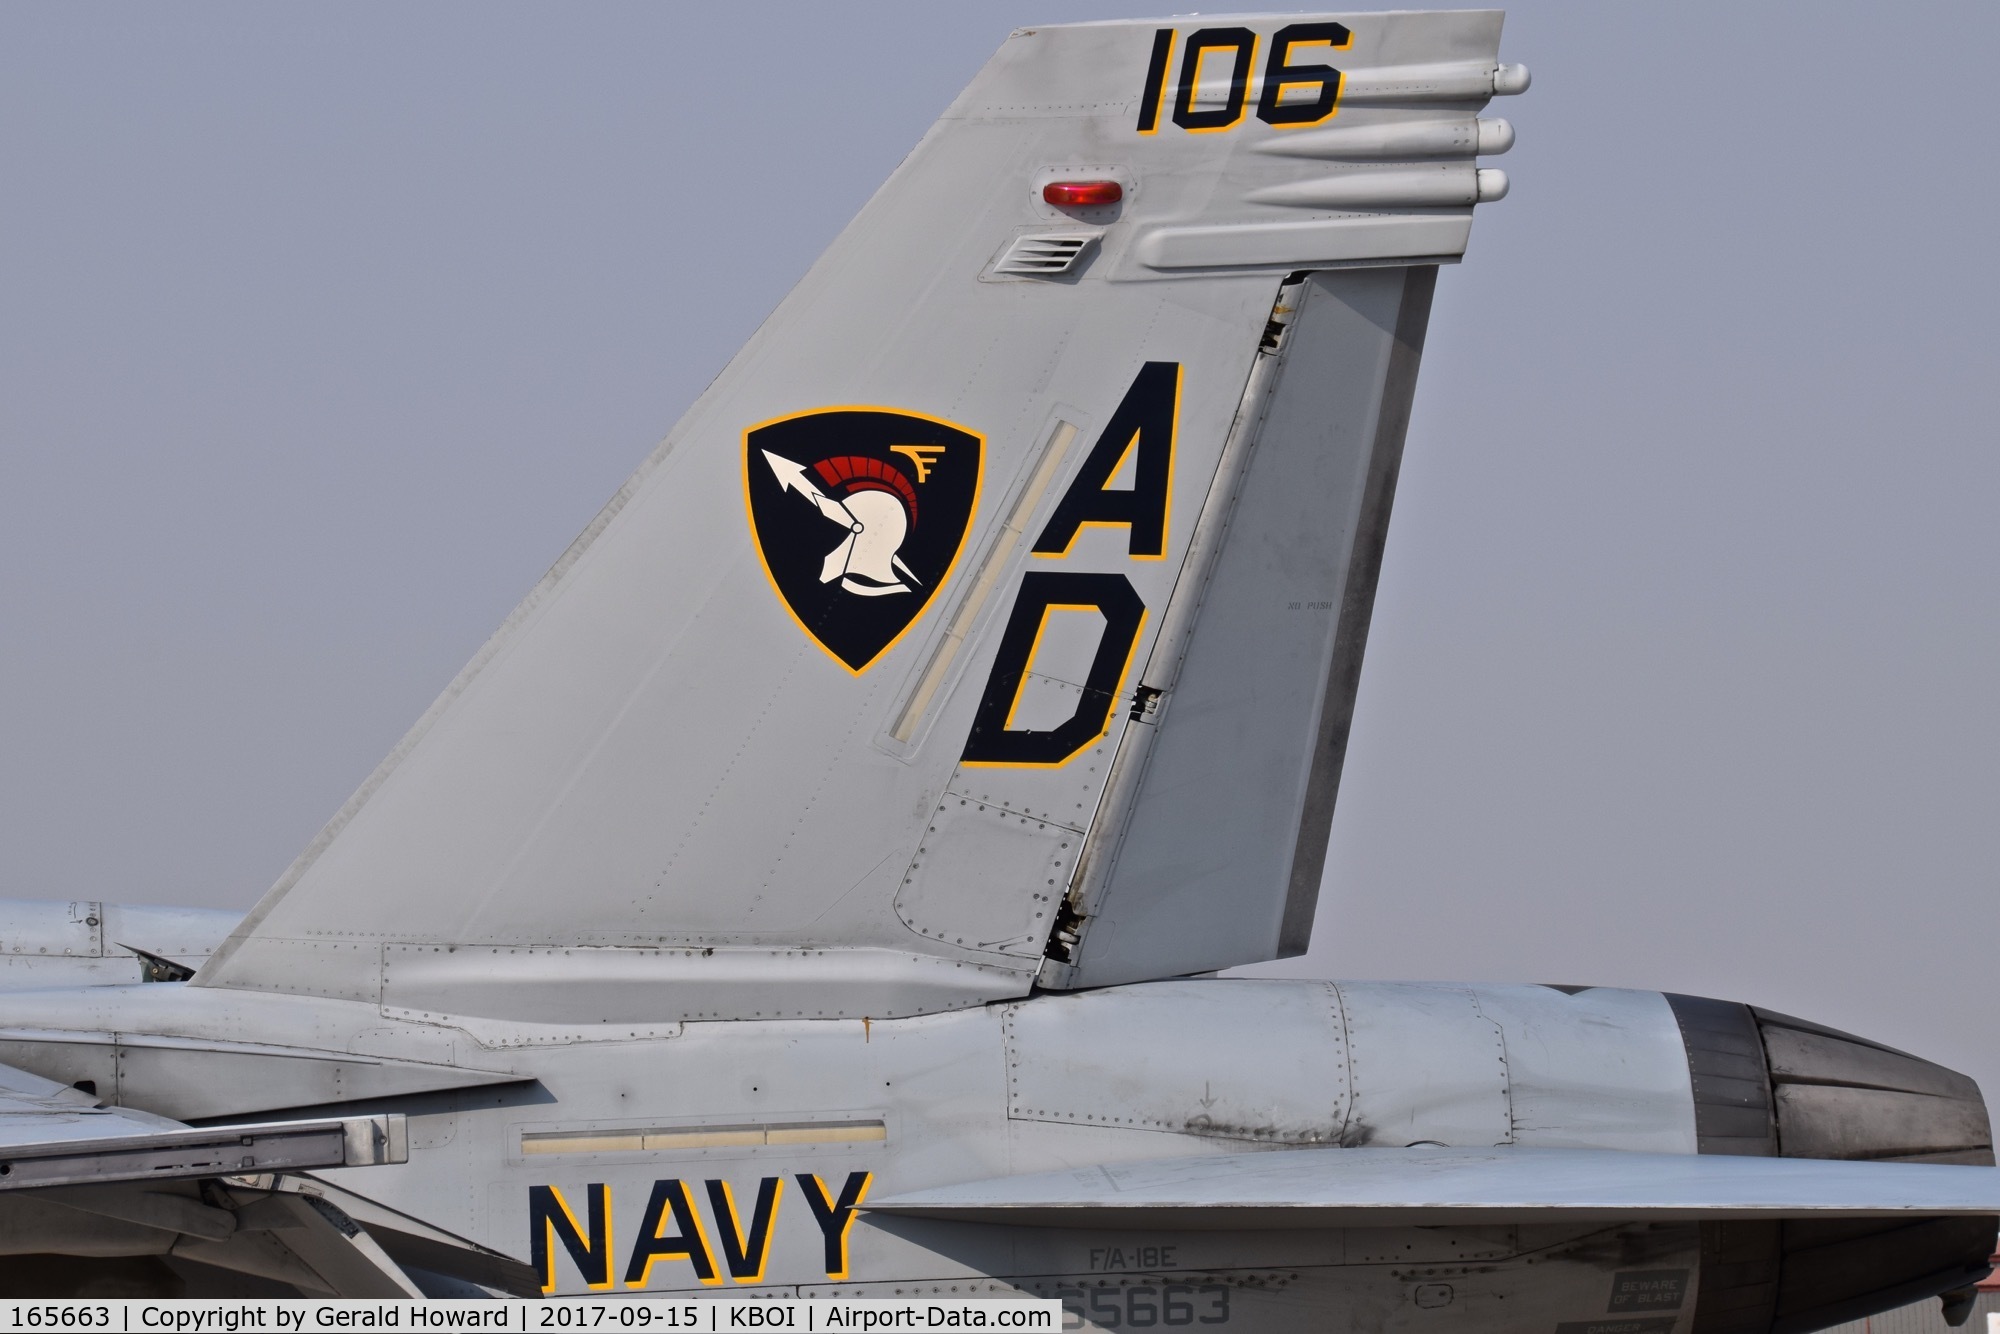 165663, Boeing F/A-18E Super Hornet C/N 1509/E017, Tail feathers.  VFA-106 